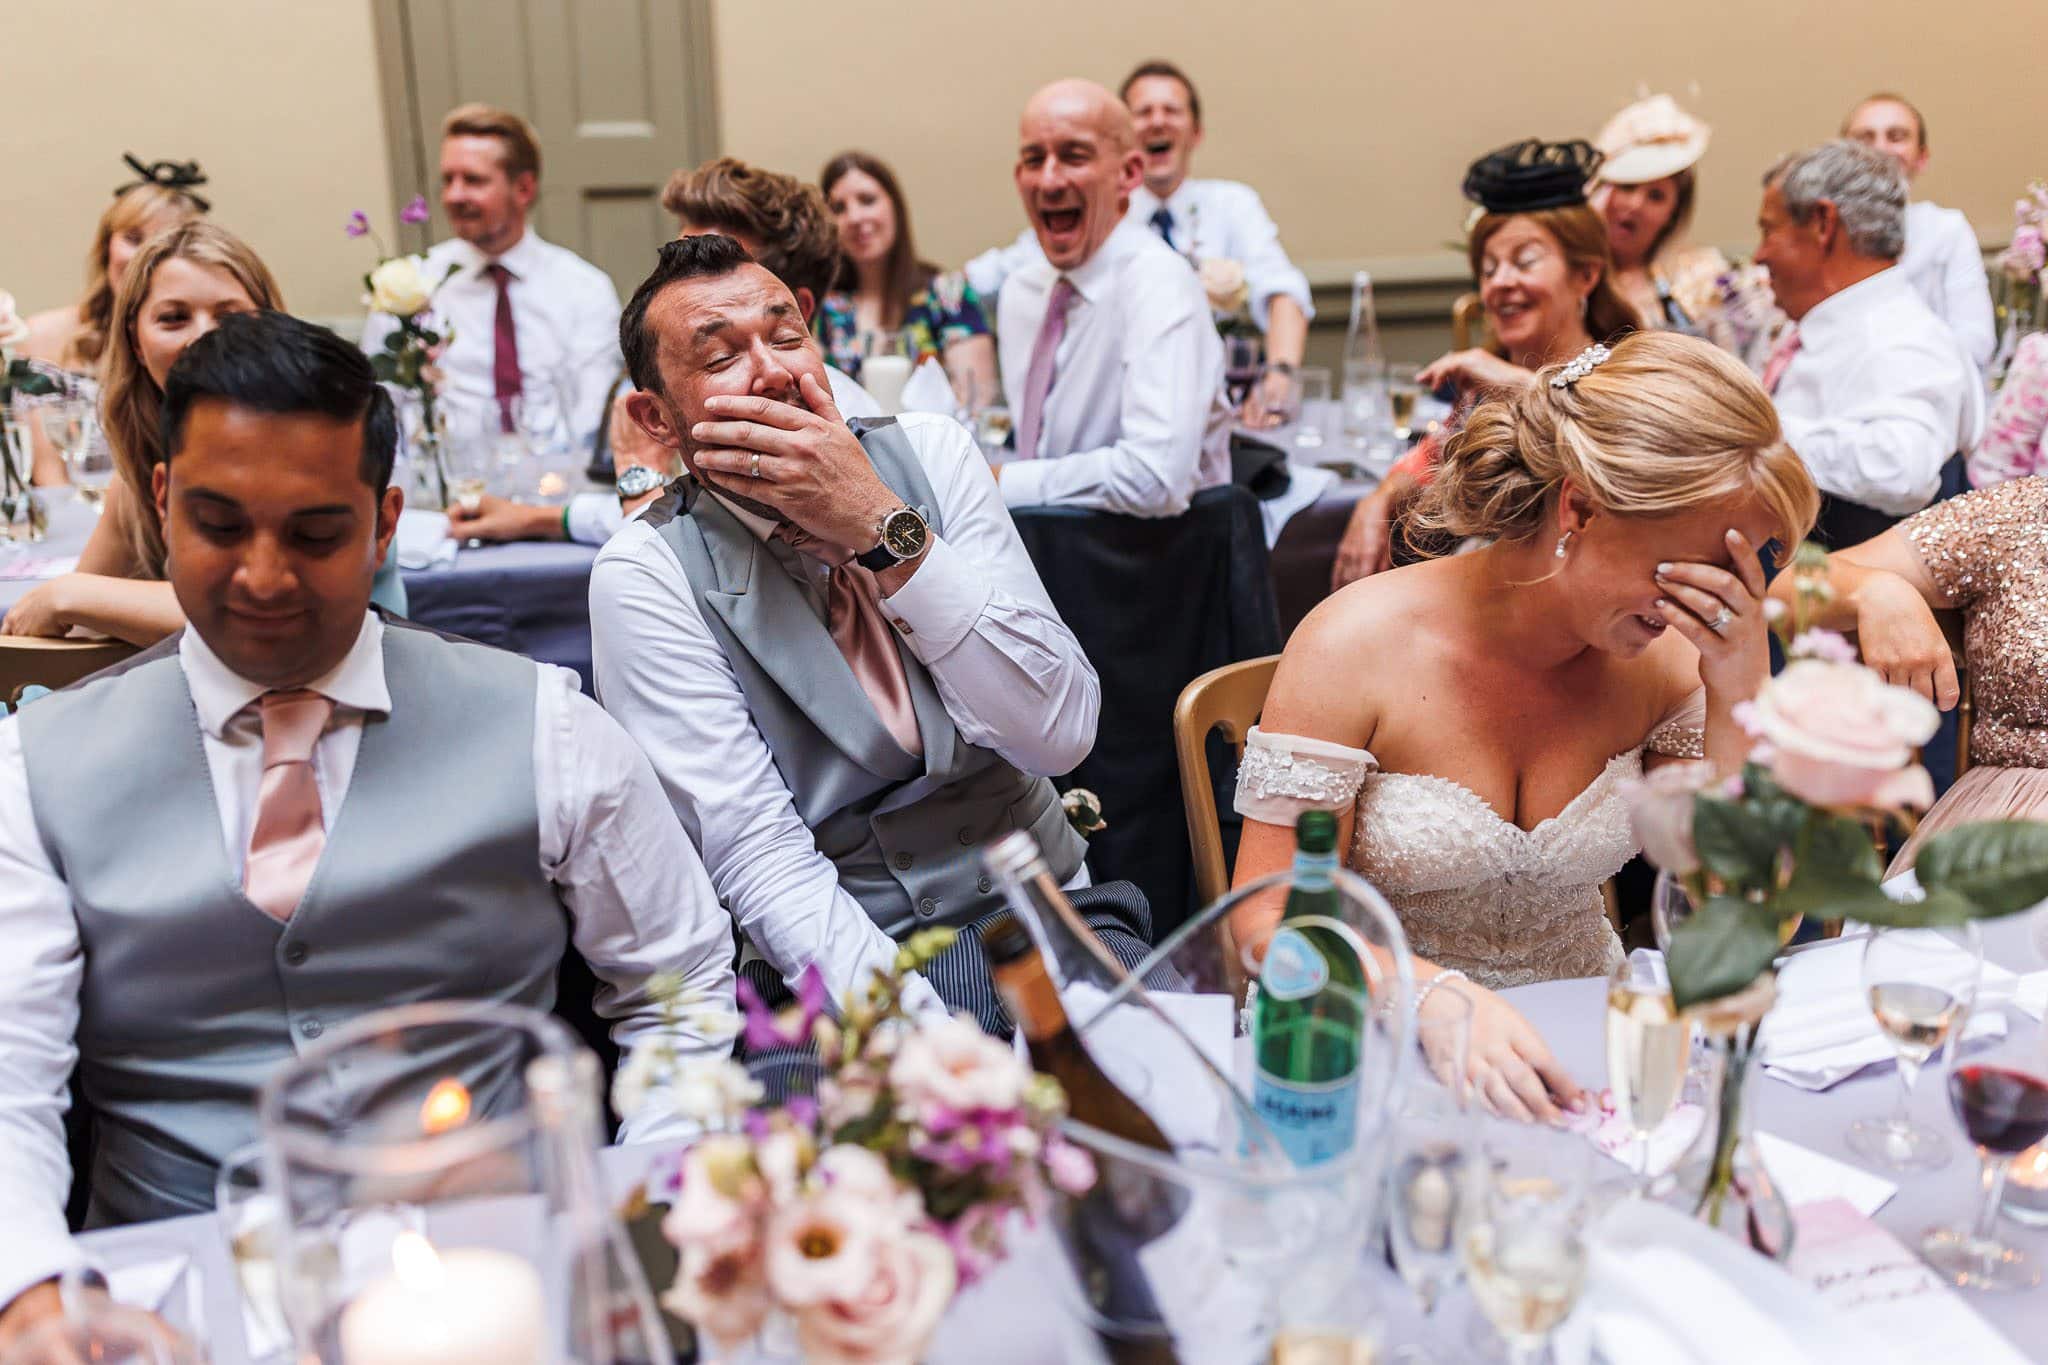 bride and groom in hysterics